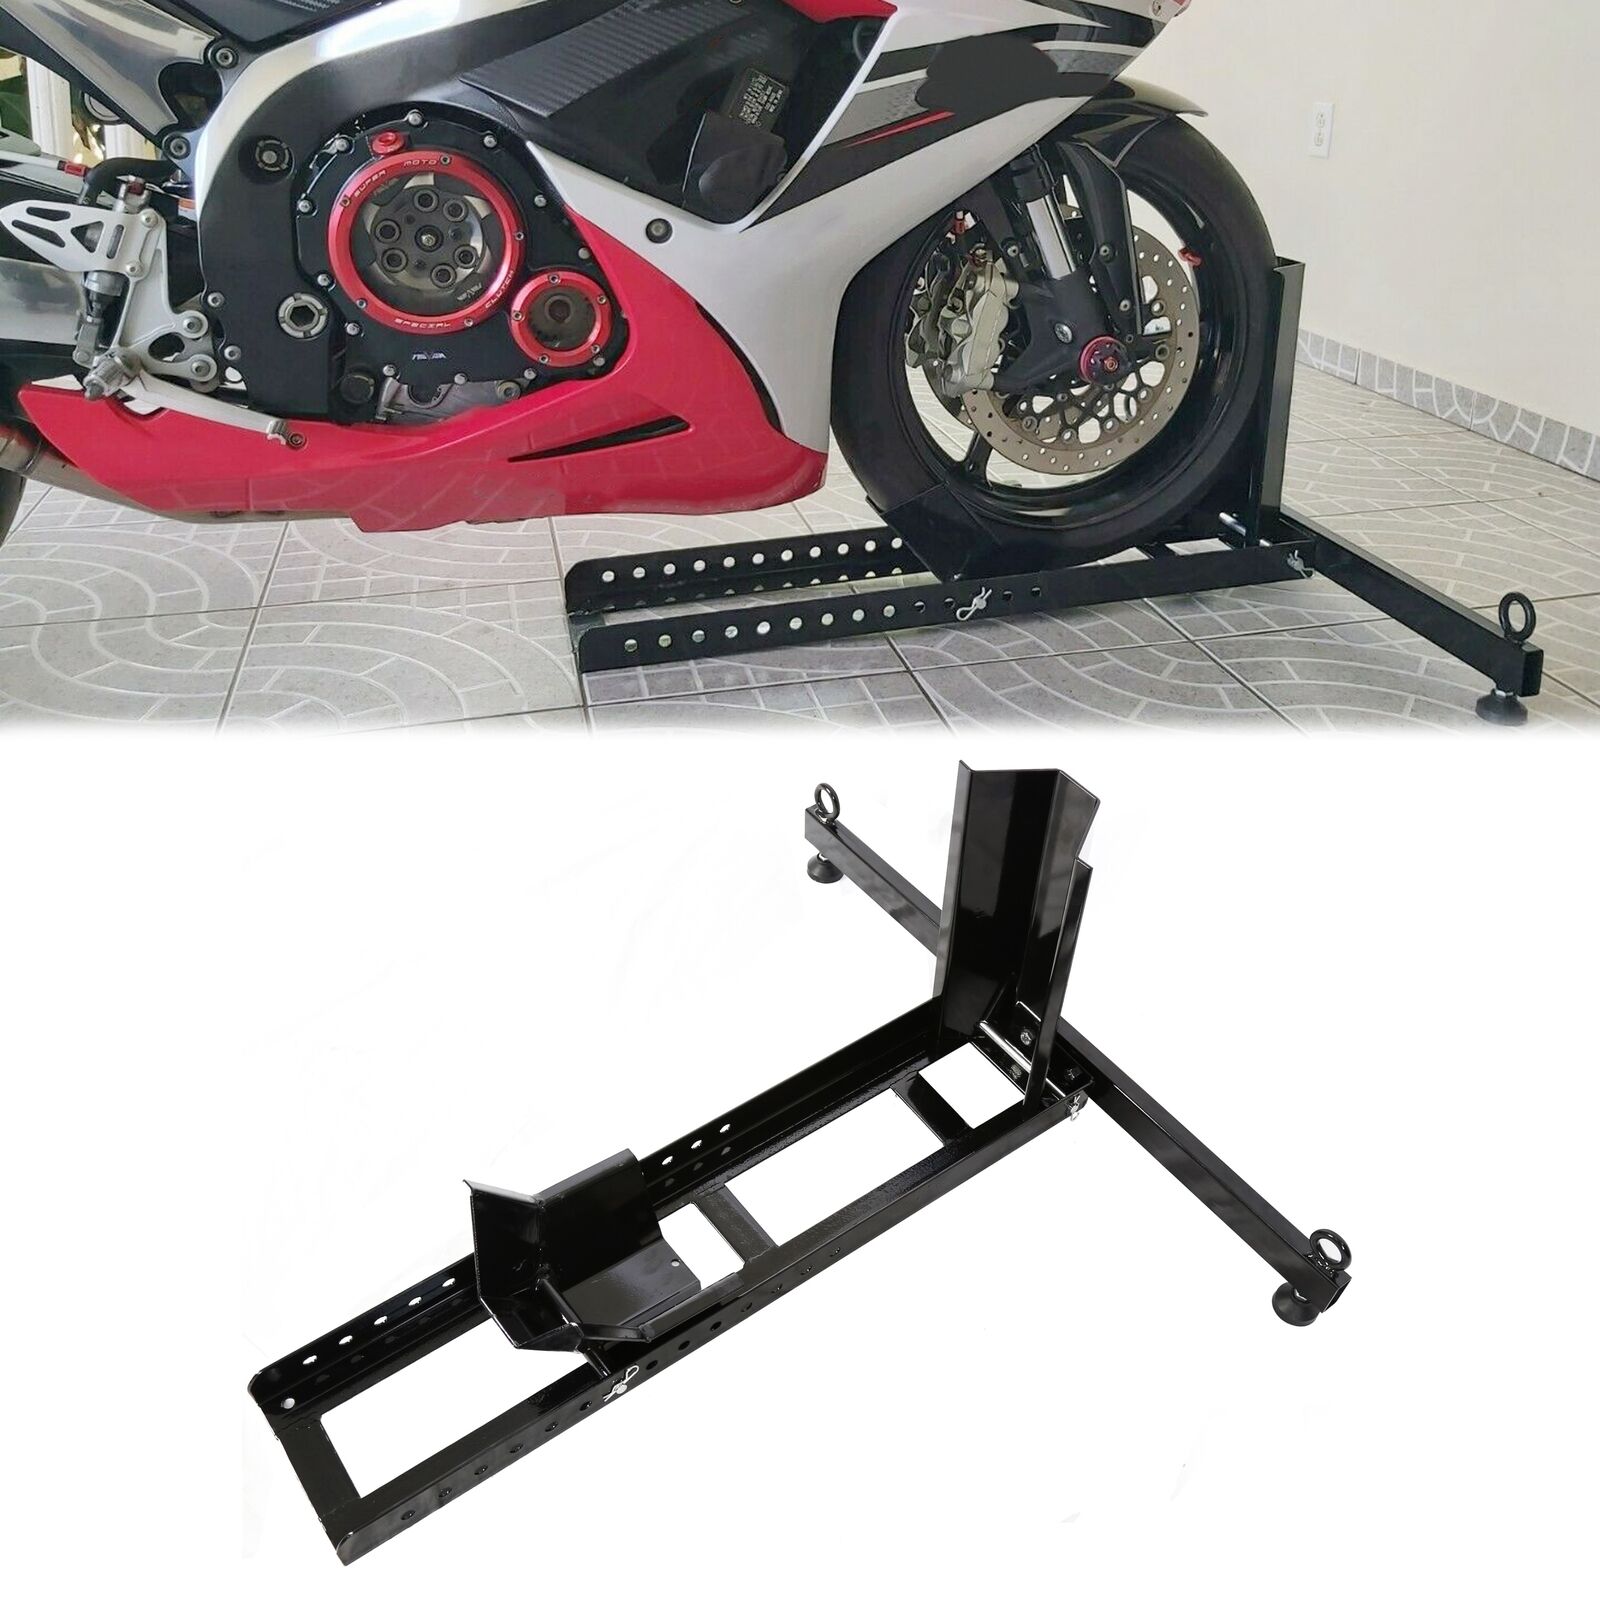 Adjustable Motorcycle Wheel Chock Upright Stand Support Powder Coated 1800 lb